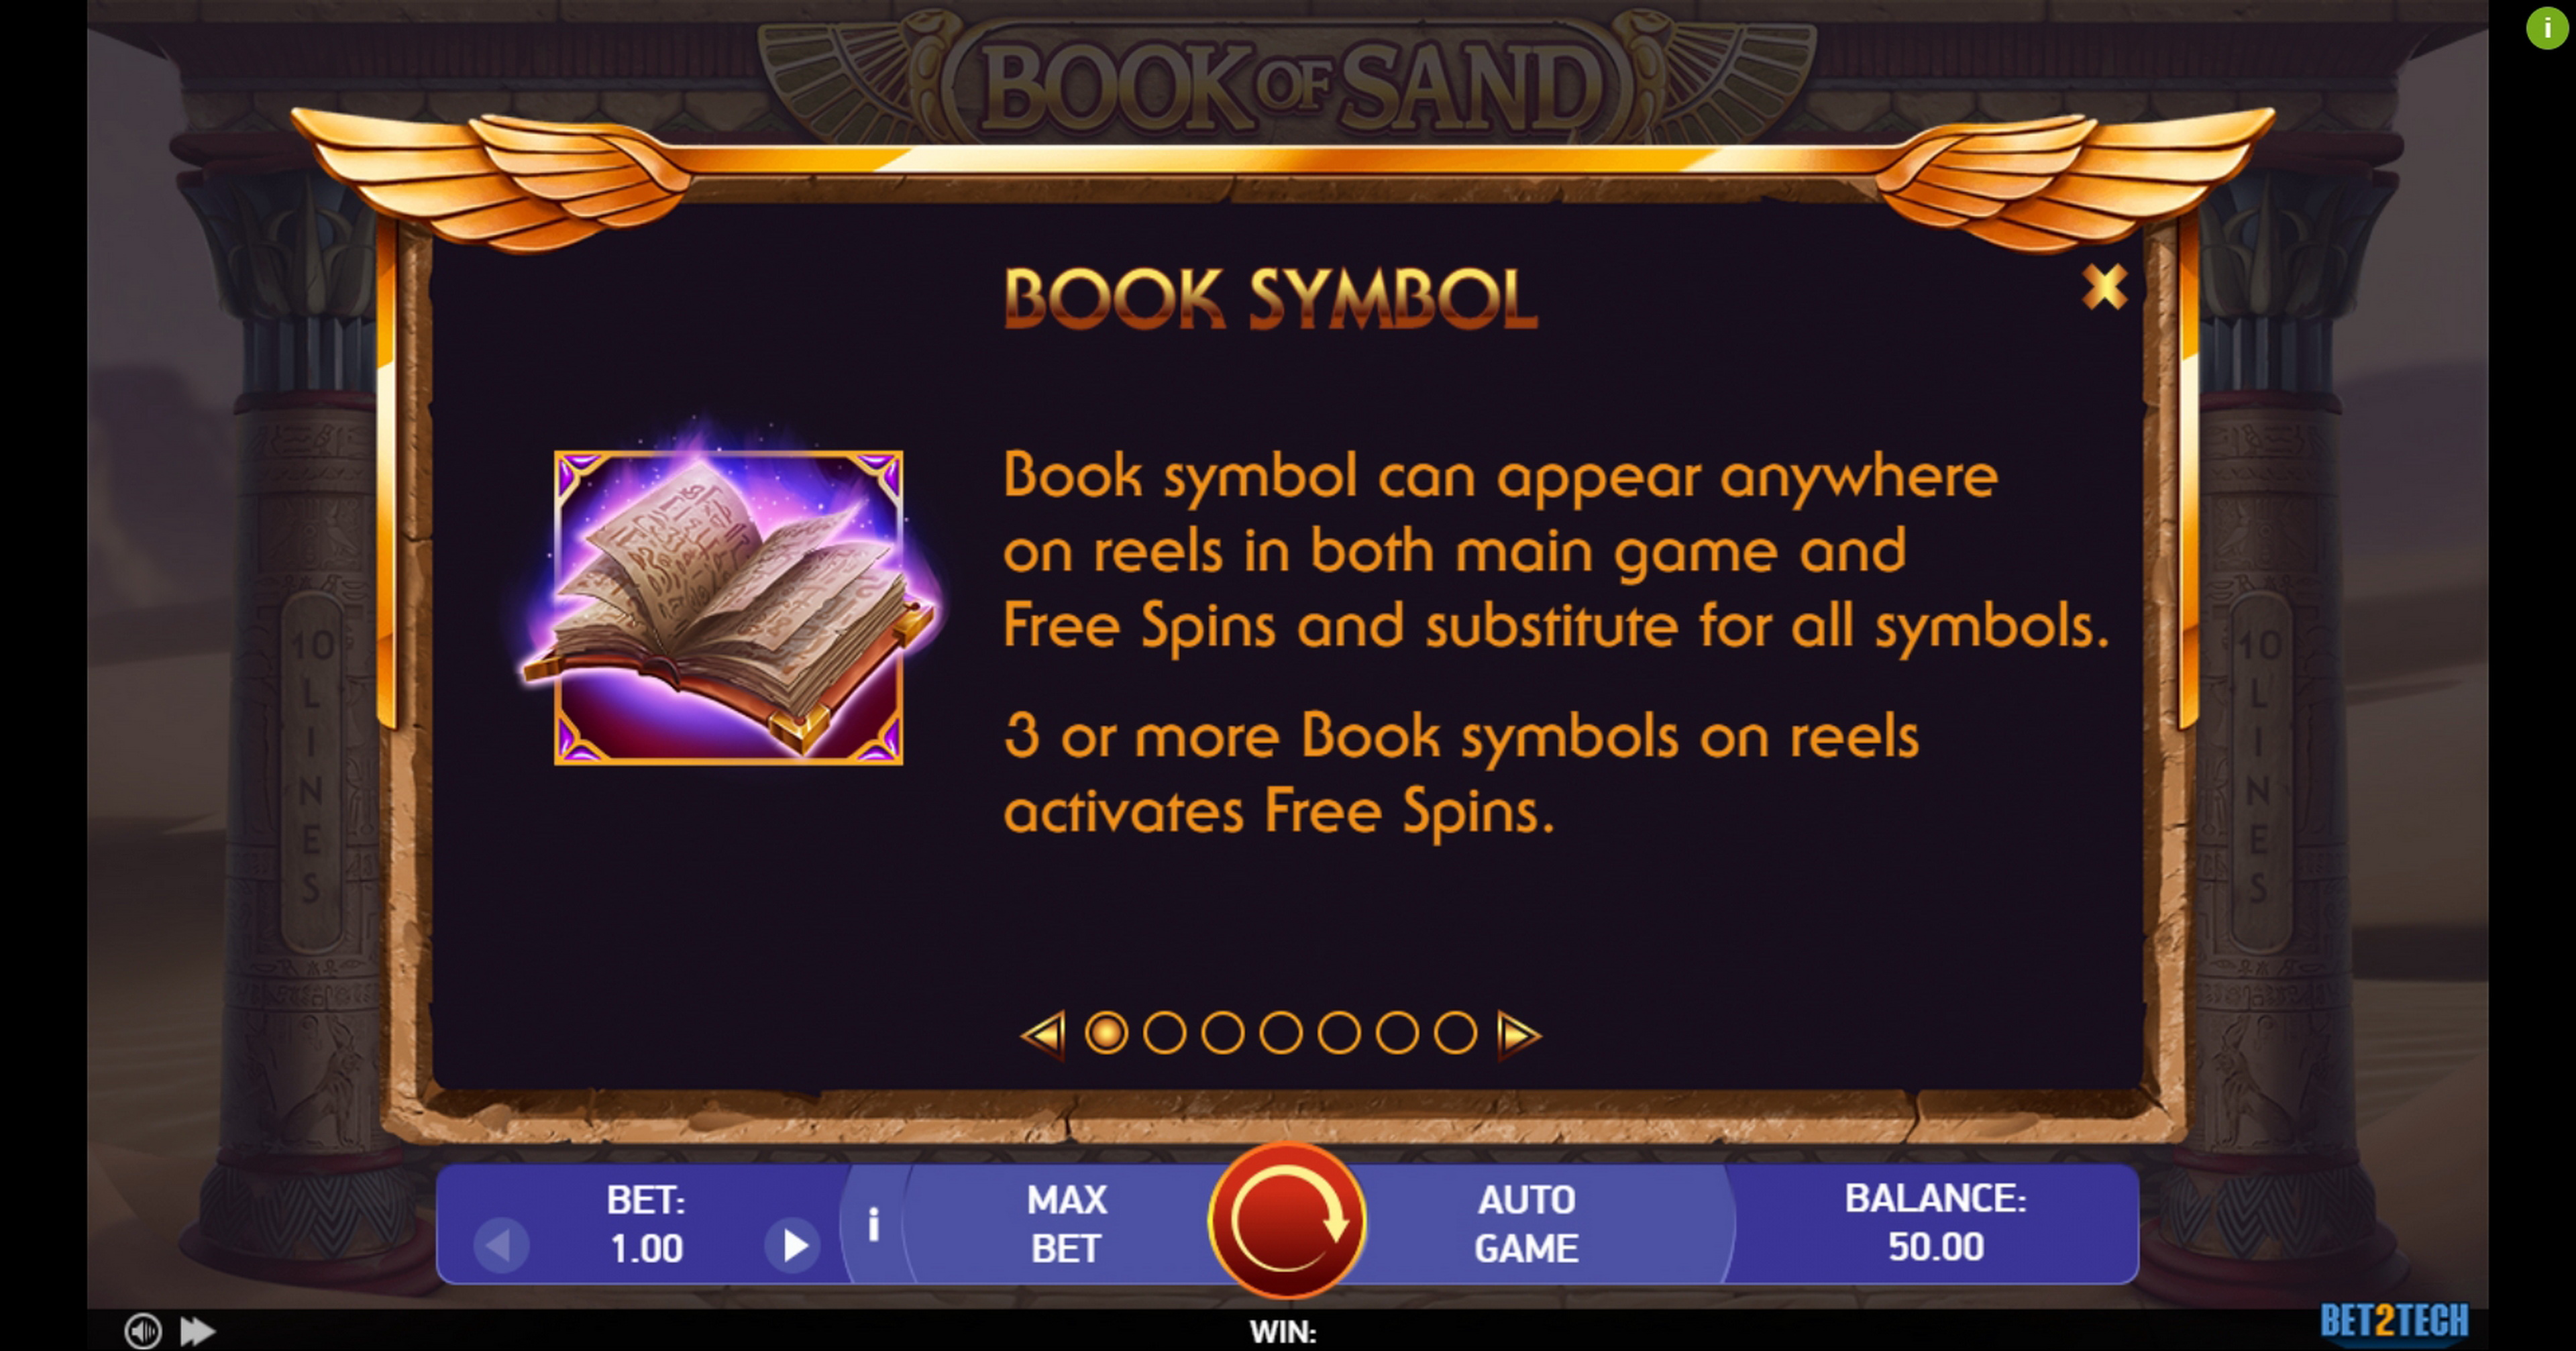 Info of Book of Sand Slot Game by Bet2Tech